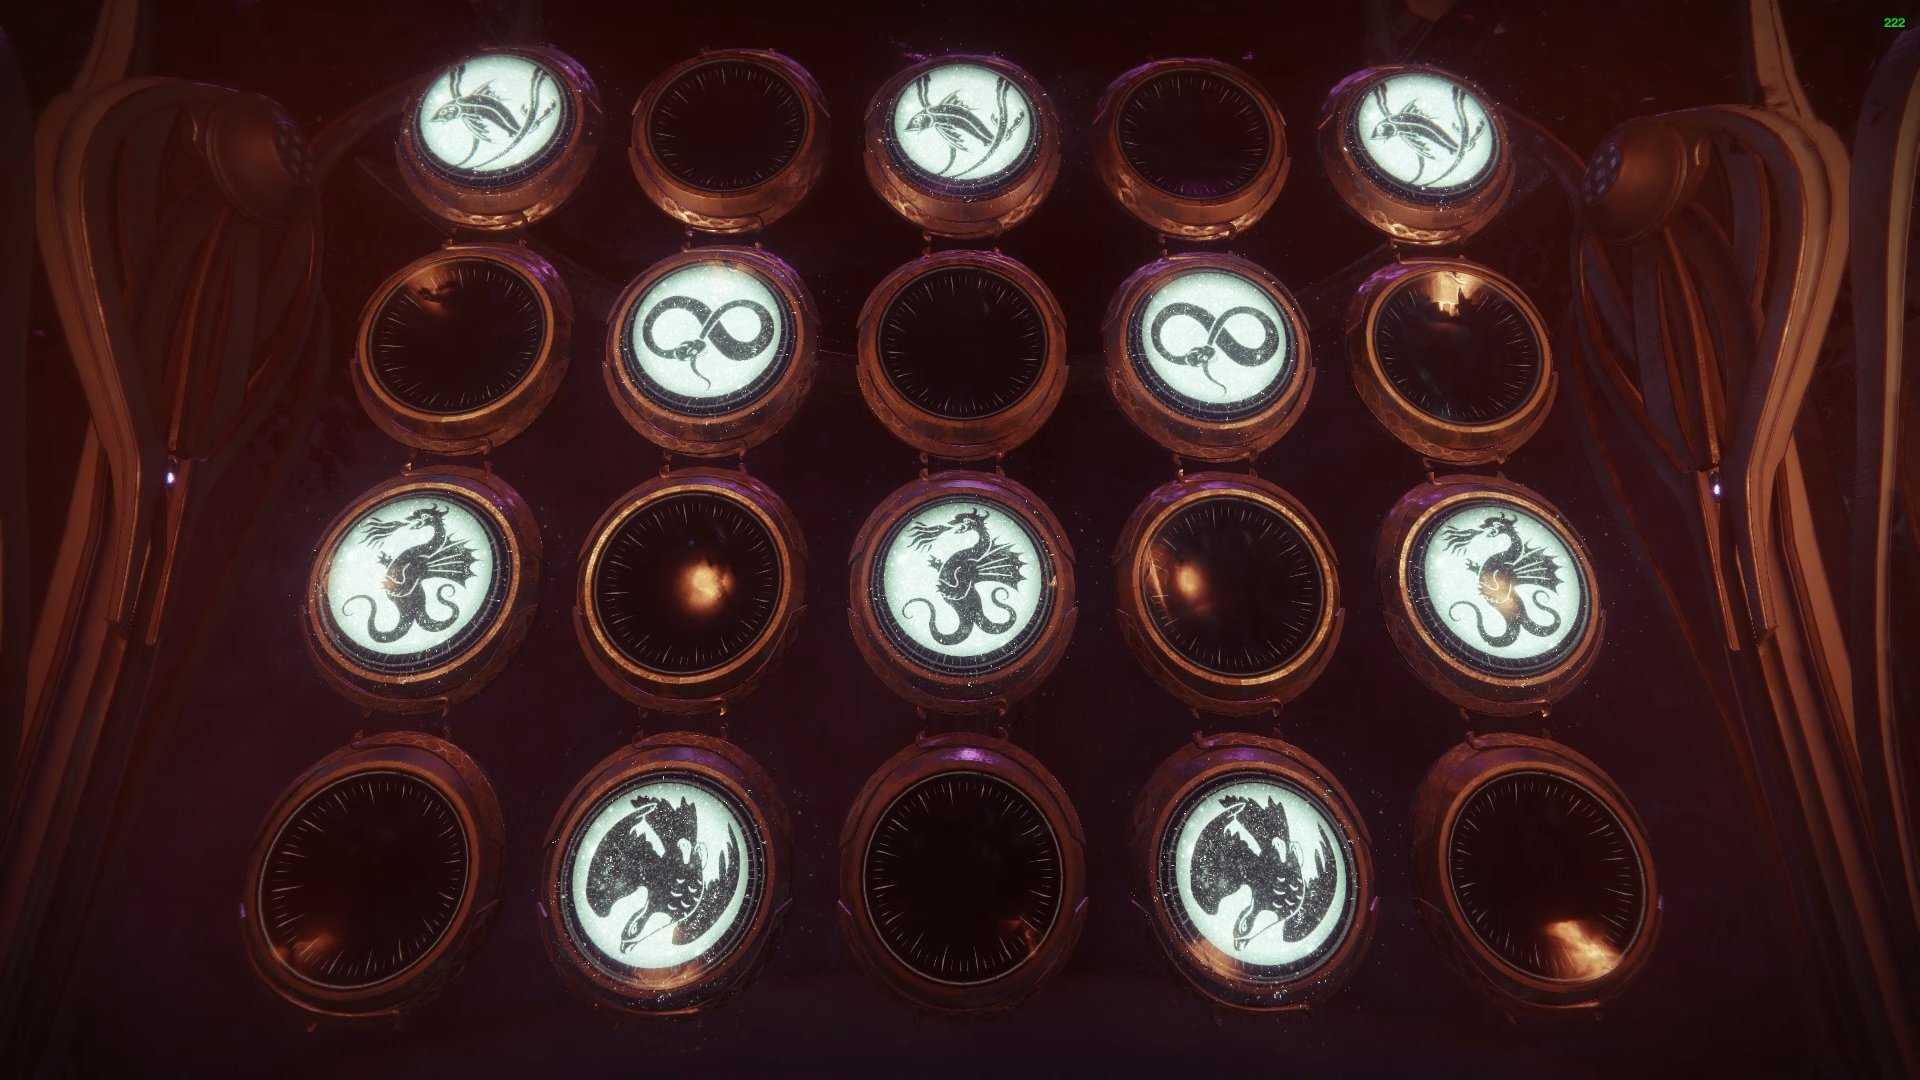 all last wish wishes, all wishes destiny 2, destiny 2 all wishes, destiny 2 last wish codes, destiny 2 wishing wall, last wish codes, last wish raid codes, riven wish wall, wall of wishes codes, wall of wishes destiny 2, wishes destiny 2